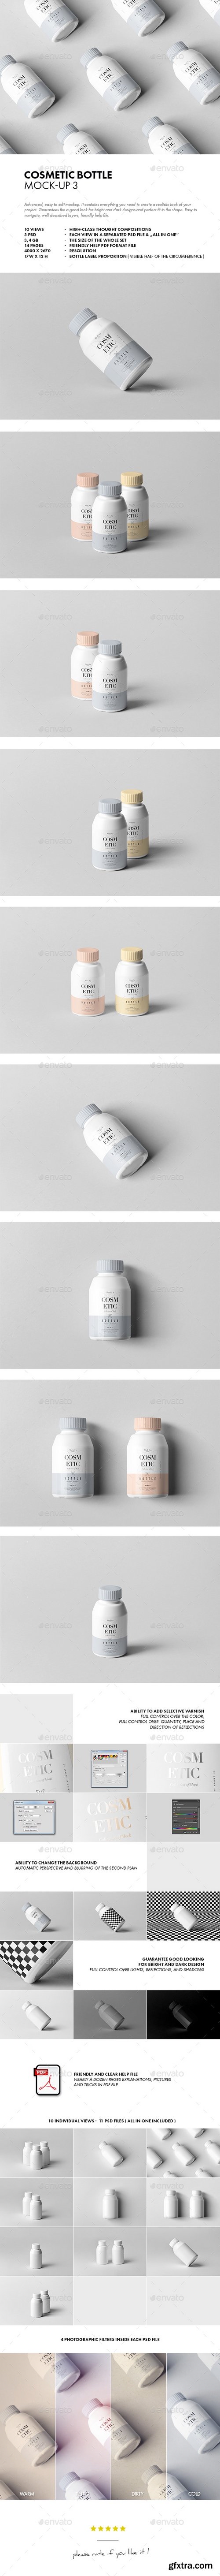 Graphicriver - Cosmetic Bottle Mock-up 3 21321268